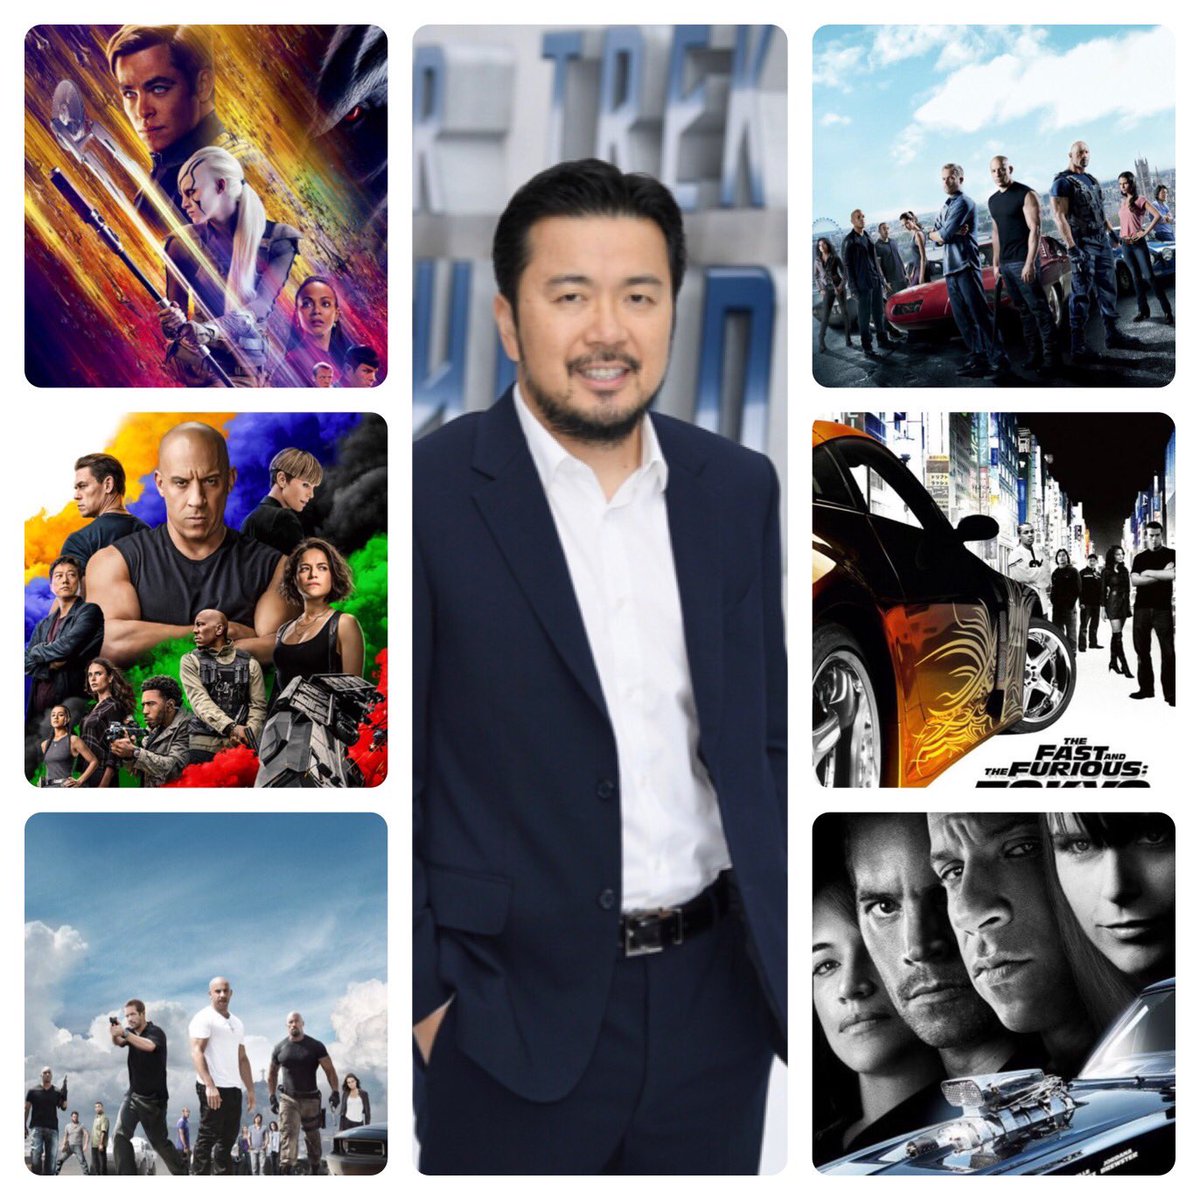 Happy 51st birthday to Justin Lin
#happybirthday #justinlin #fastandfurious3 #thefastandthefurioustokyodrift #tokyodrift #fastandfurious4 #fastandfurious #fastfive #fast5 #fastandfurious5  #fastandfurious6 #furious6 #f9 #fastandfurious9 #f9thefastsaga #startrekbeyond